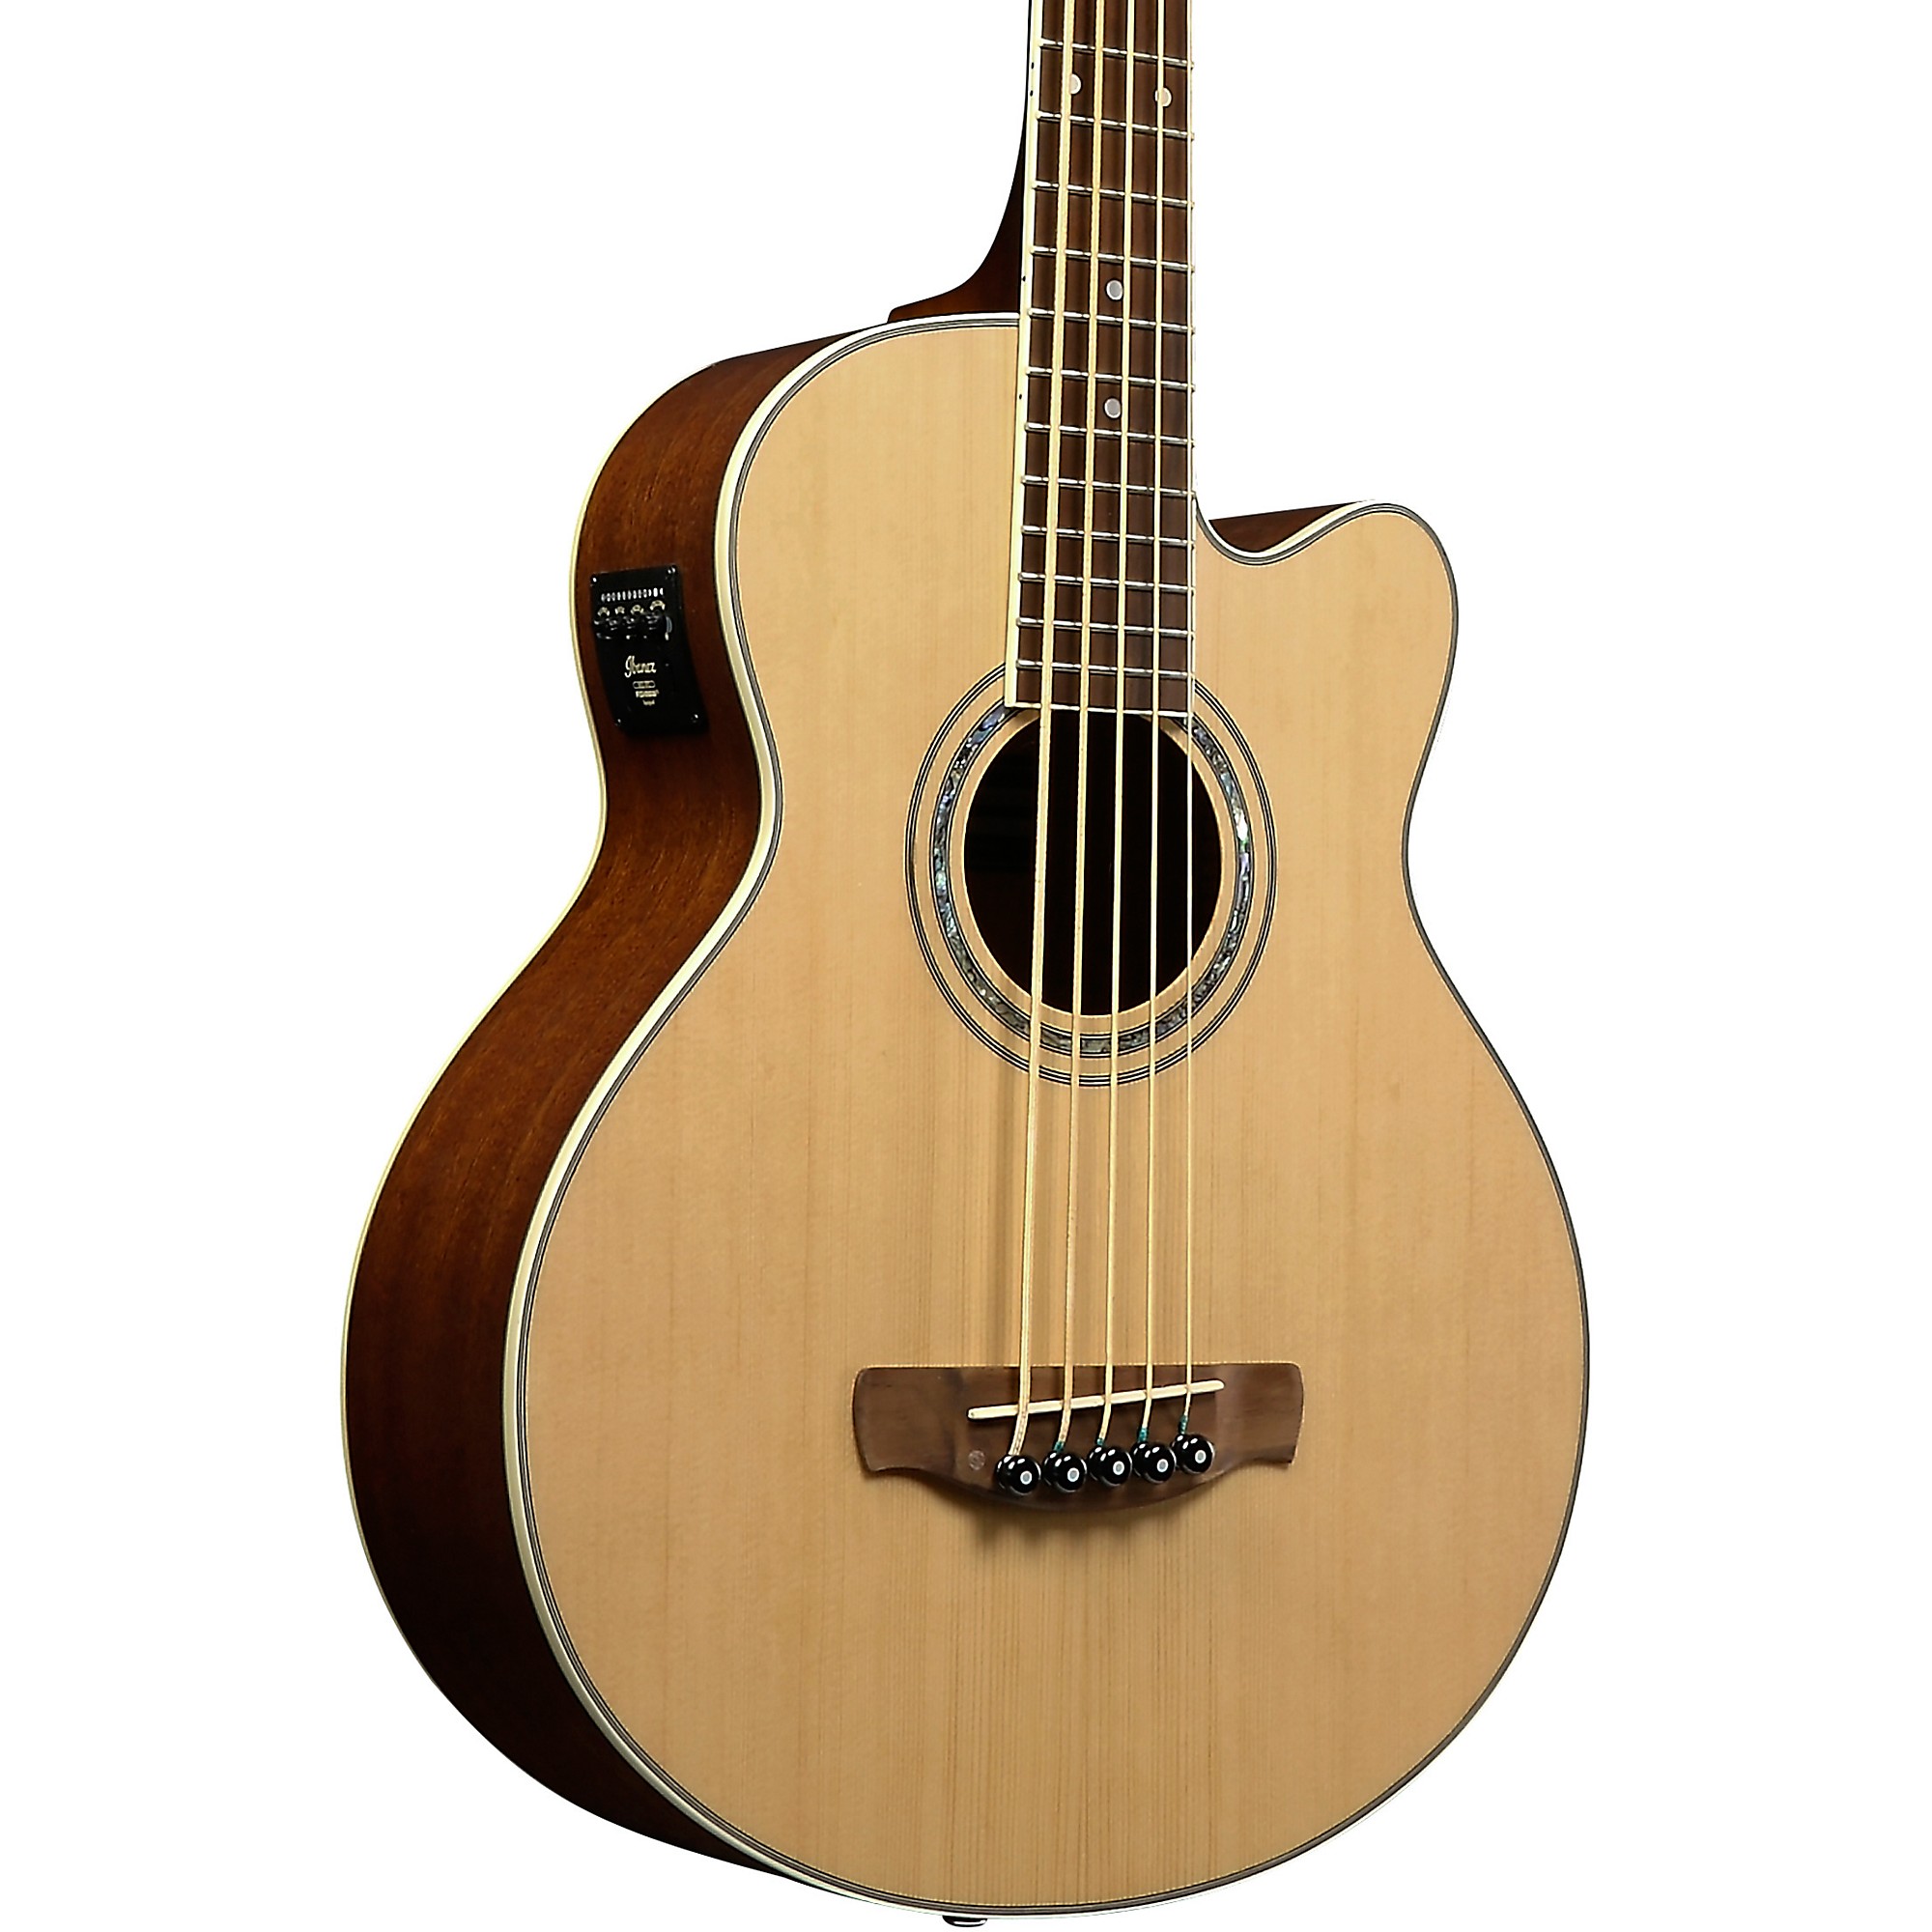 Gloss　Guitar　5-String　Acoustic-Electric　Natural　Bass　Center　Ibanez　AEB105E